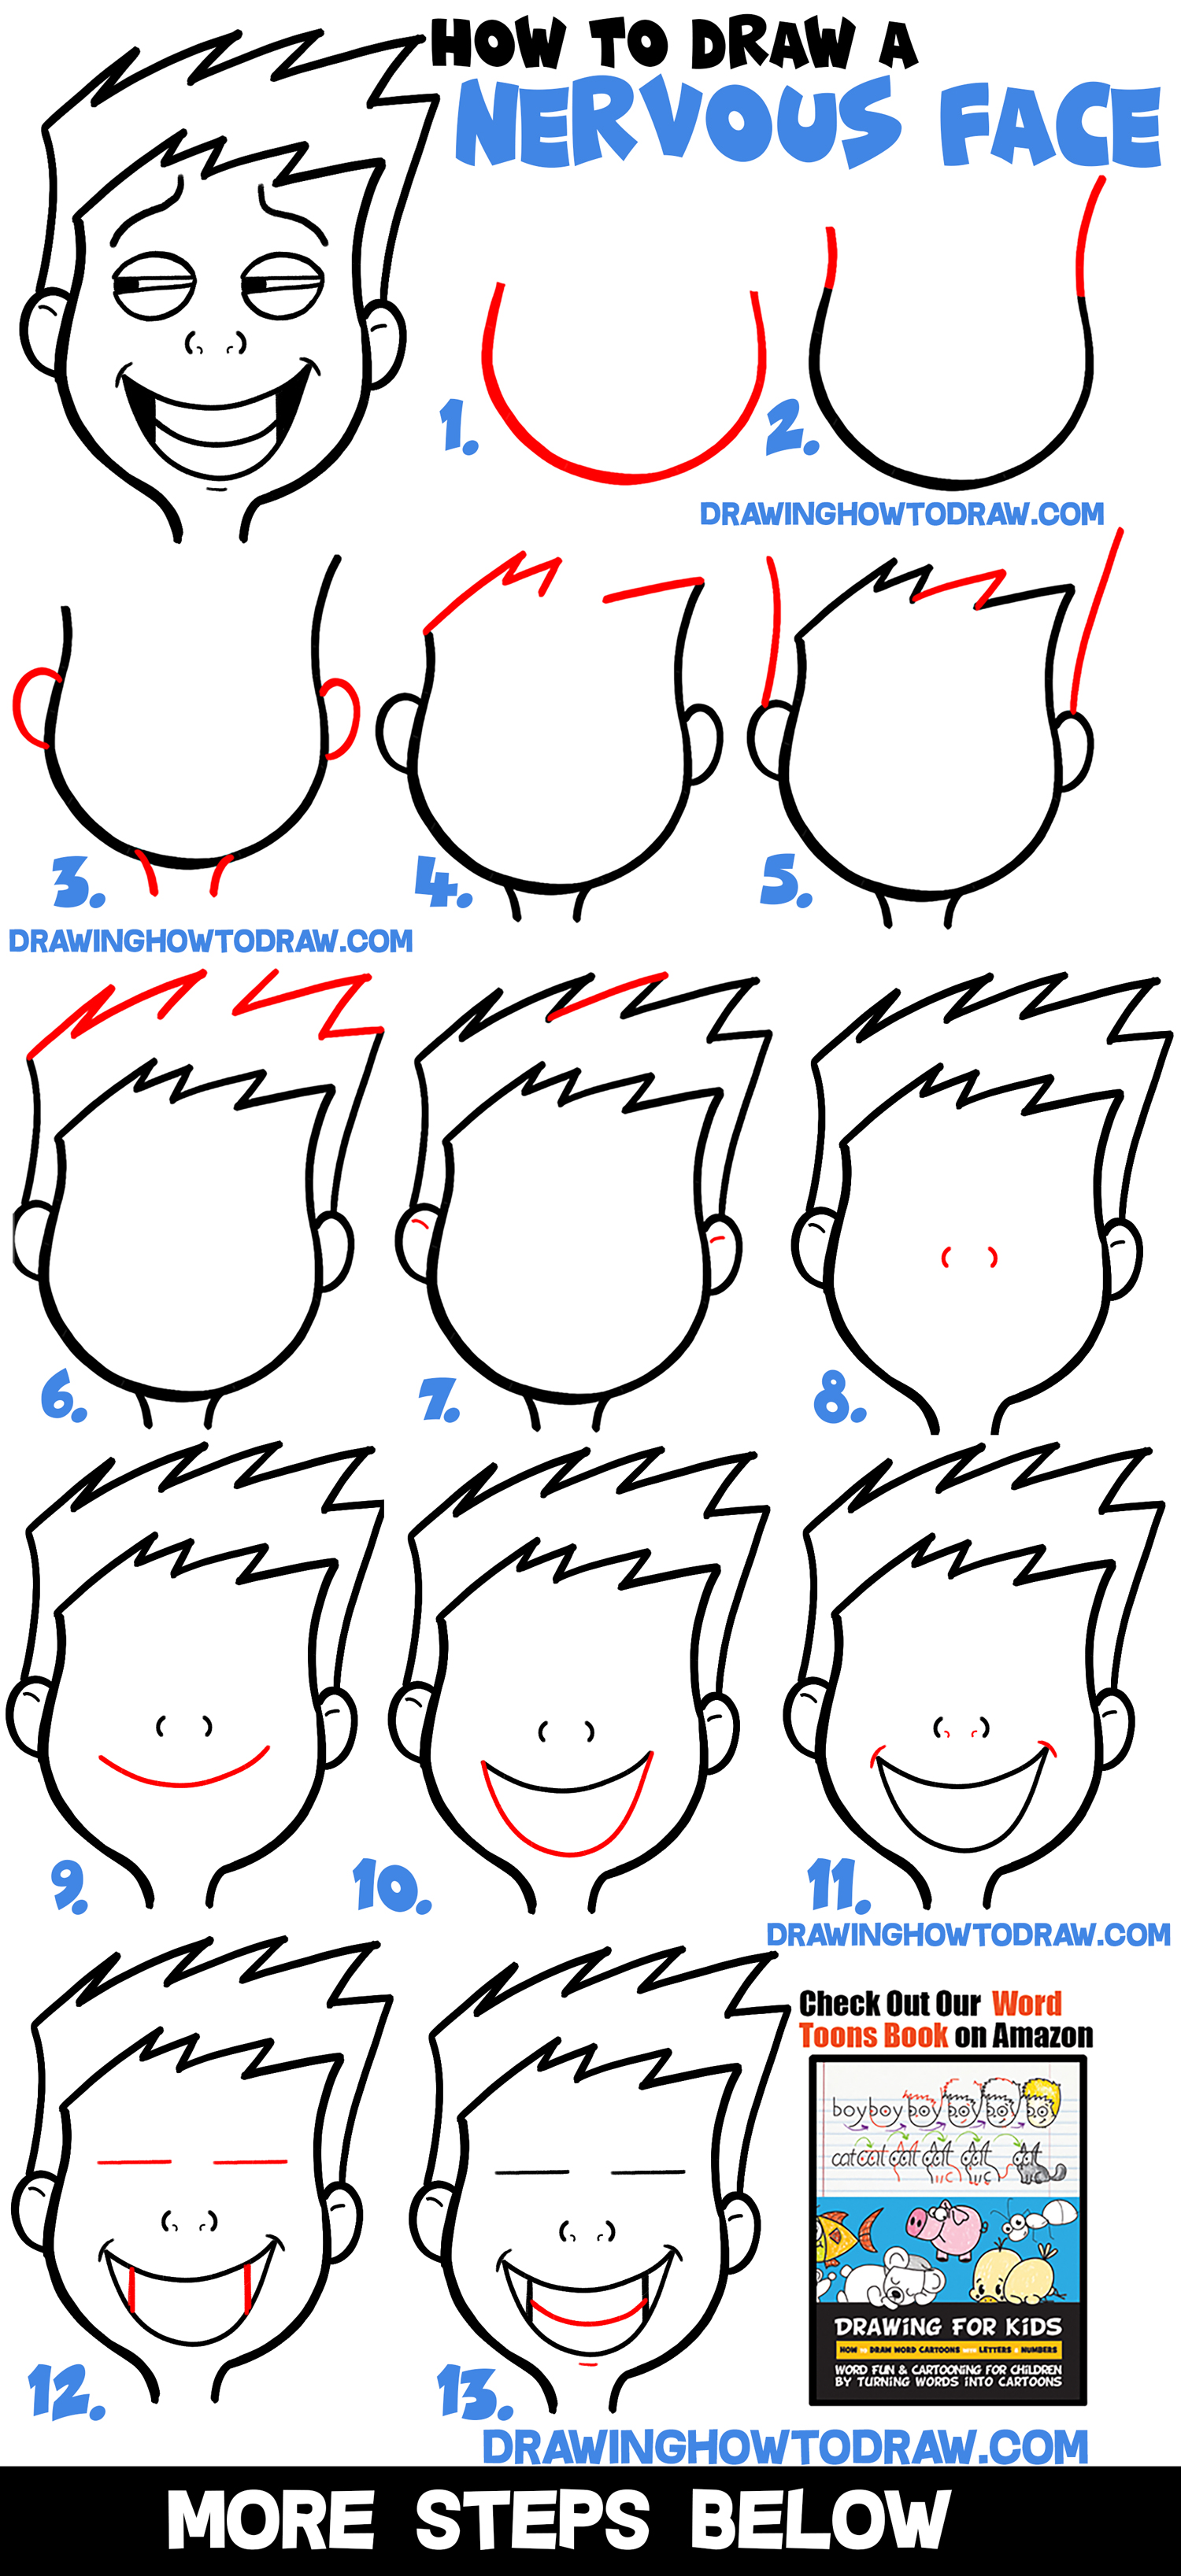 How to Draw Cartoon People – Step by Step Guide | Cartoon people, Cartoon  drawings, Drawing cartoon characters